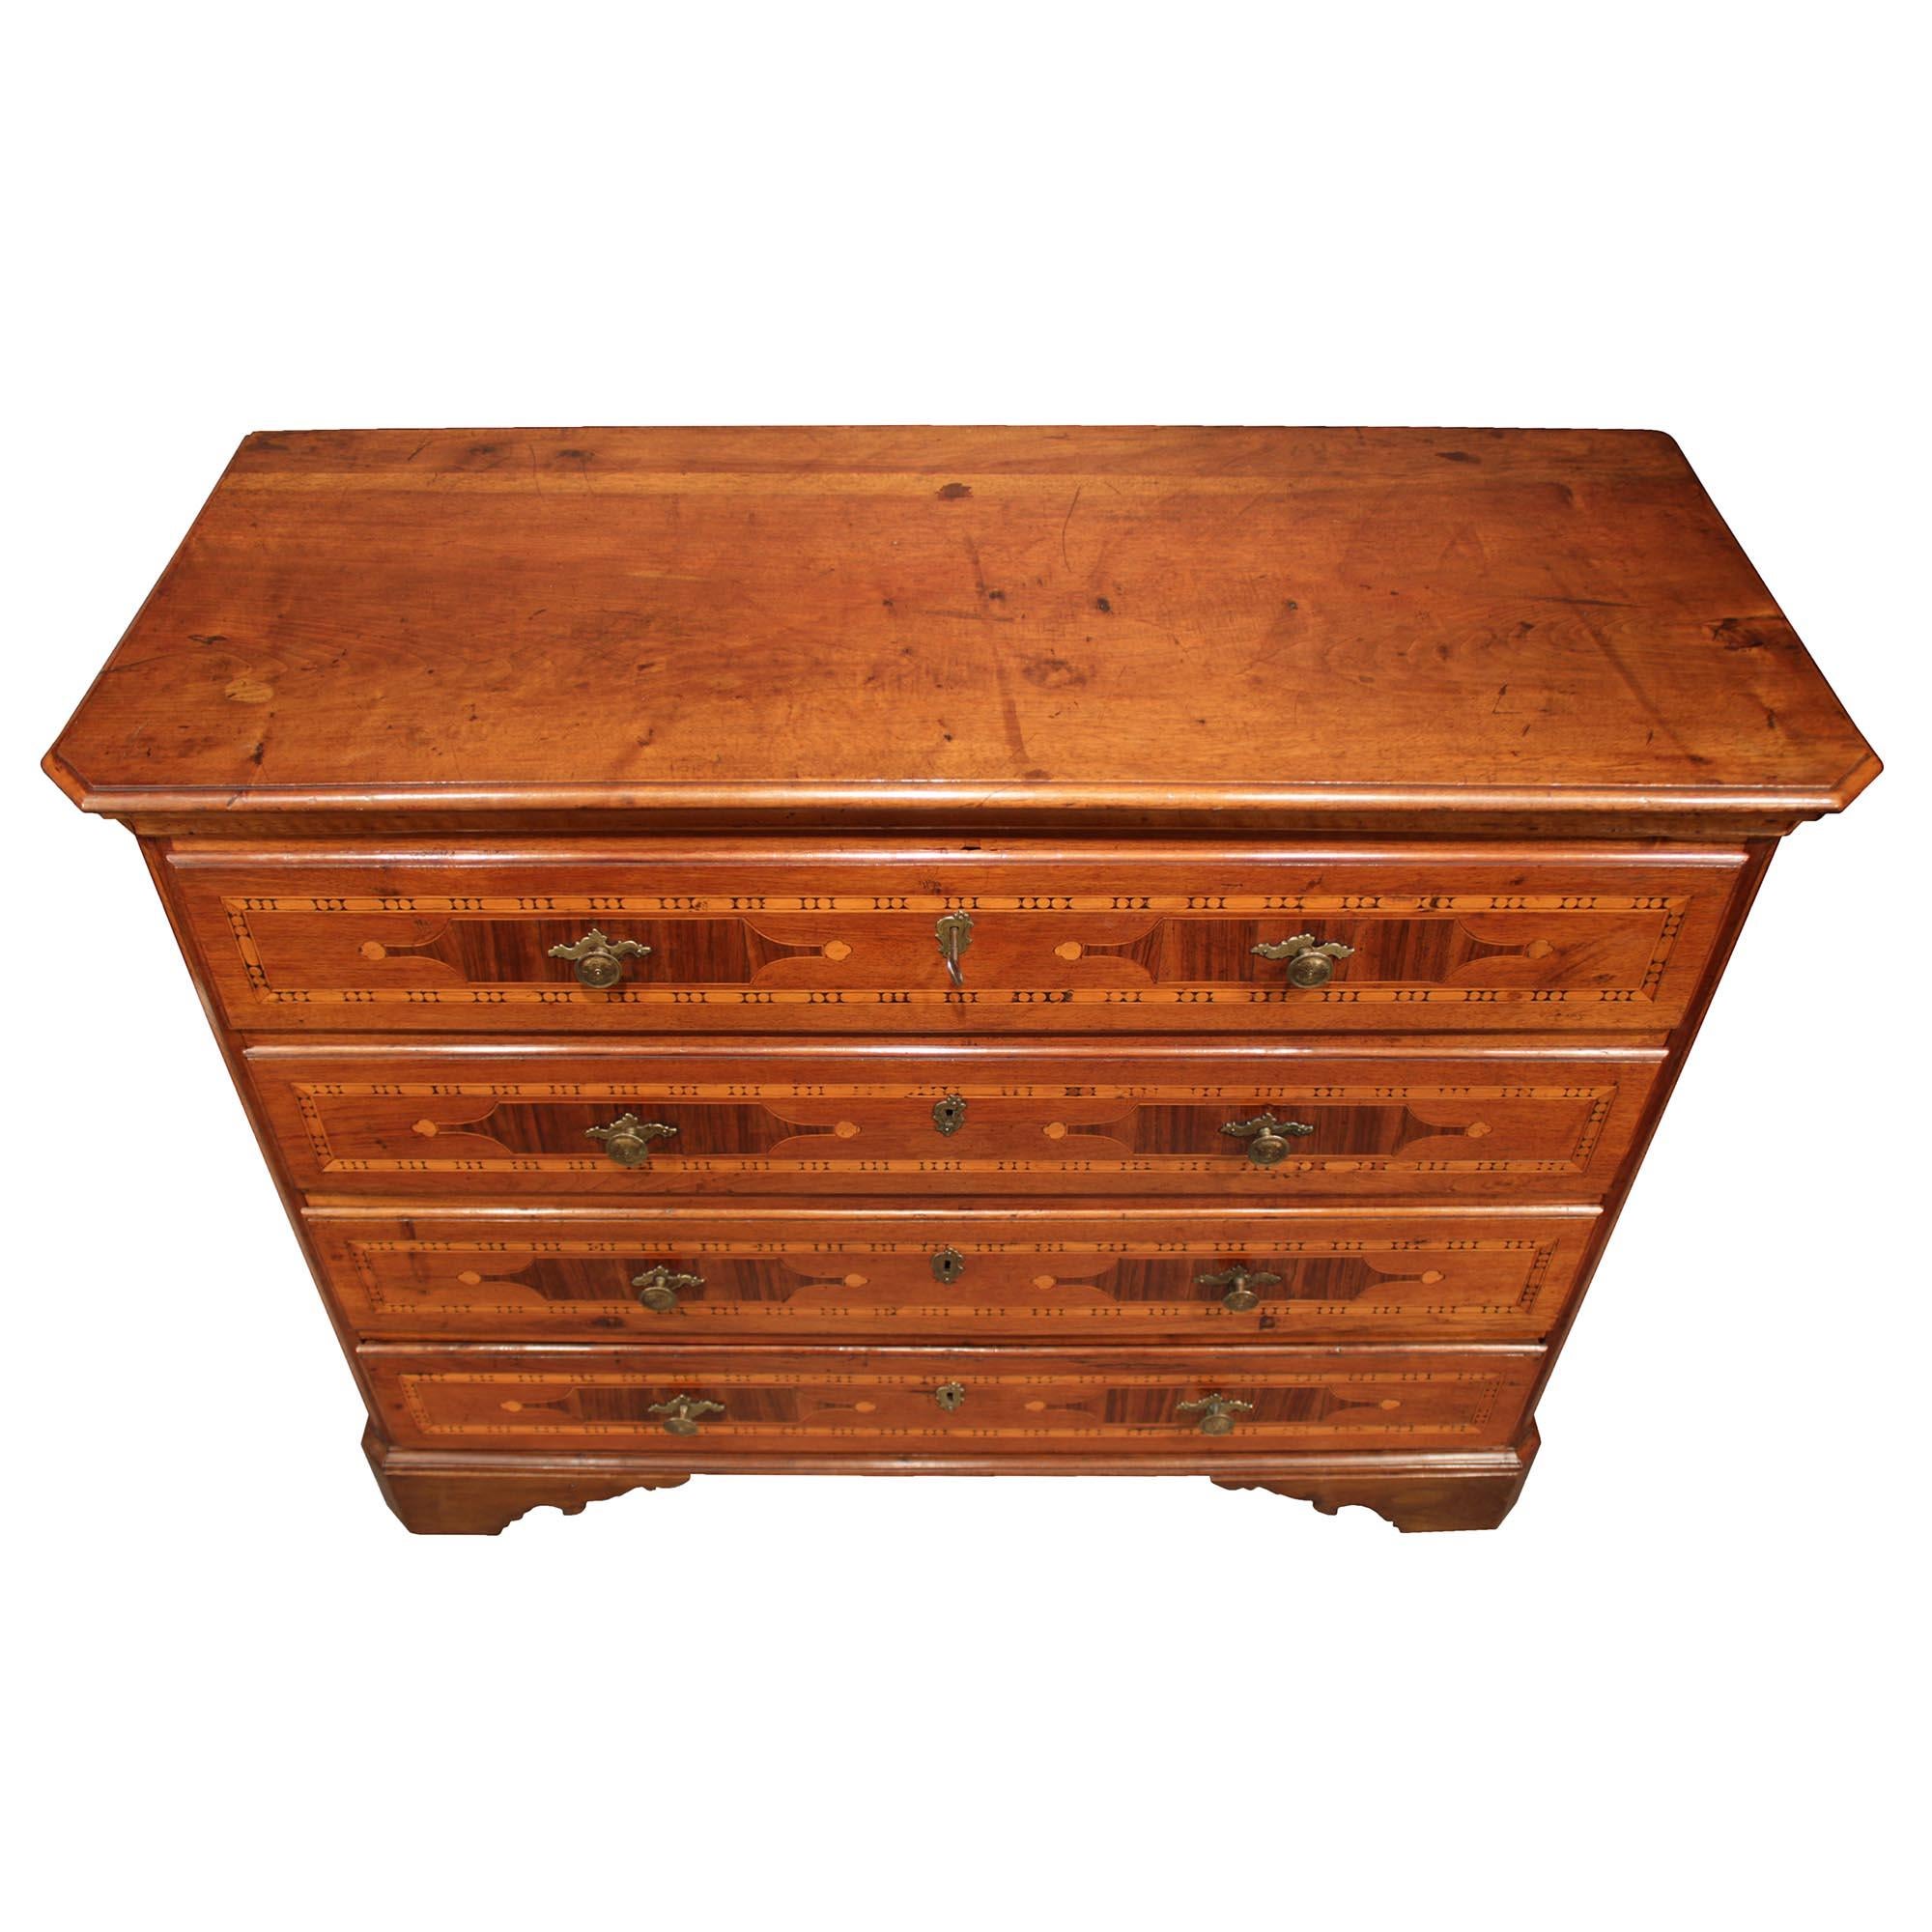 A handsome Italian 18th-century country four-drawer pine and walnut chest. The chest is raised on scalloped supports below a mottled straight frieze. Each of the four drawers retains their original brass keyhole escutcheons and pulls and are